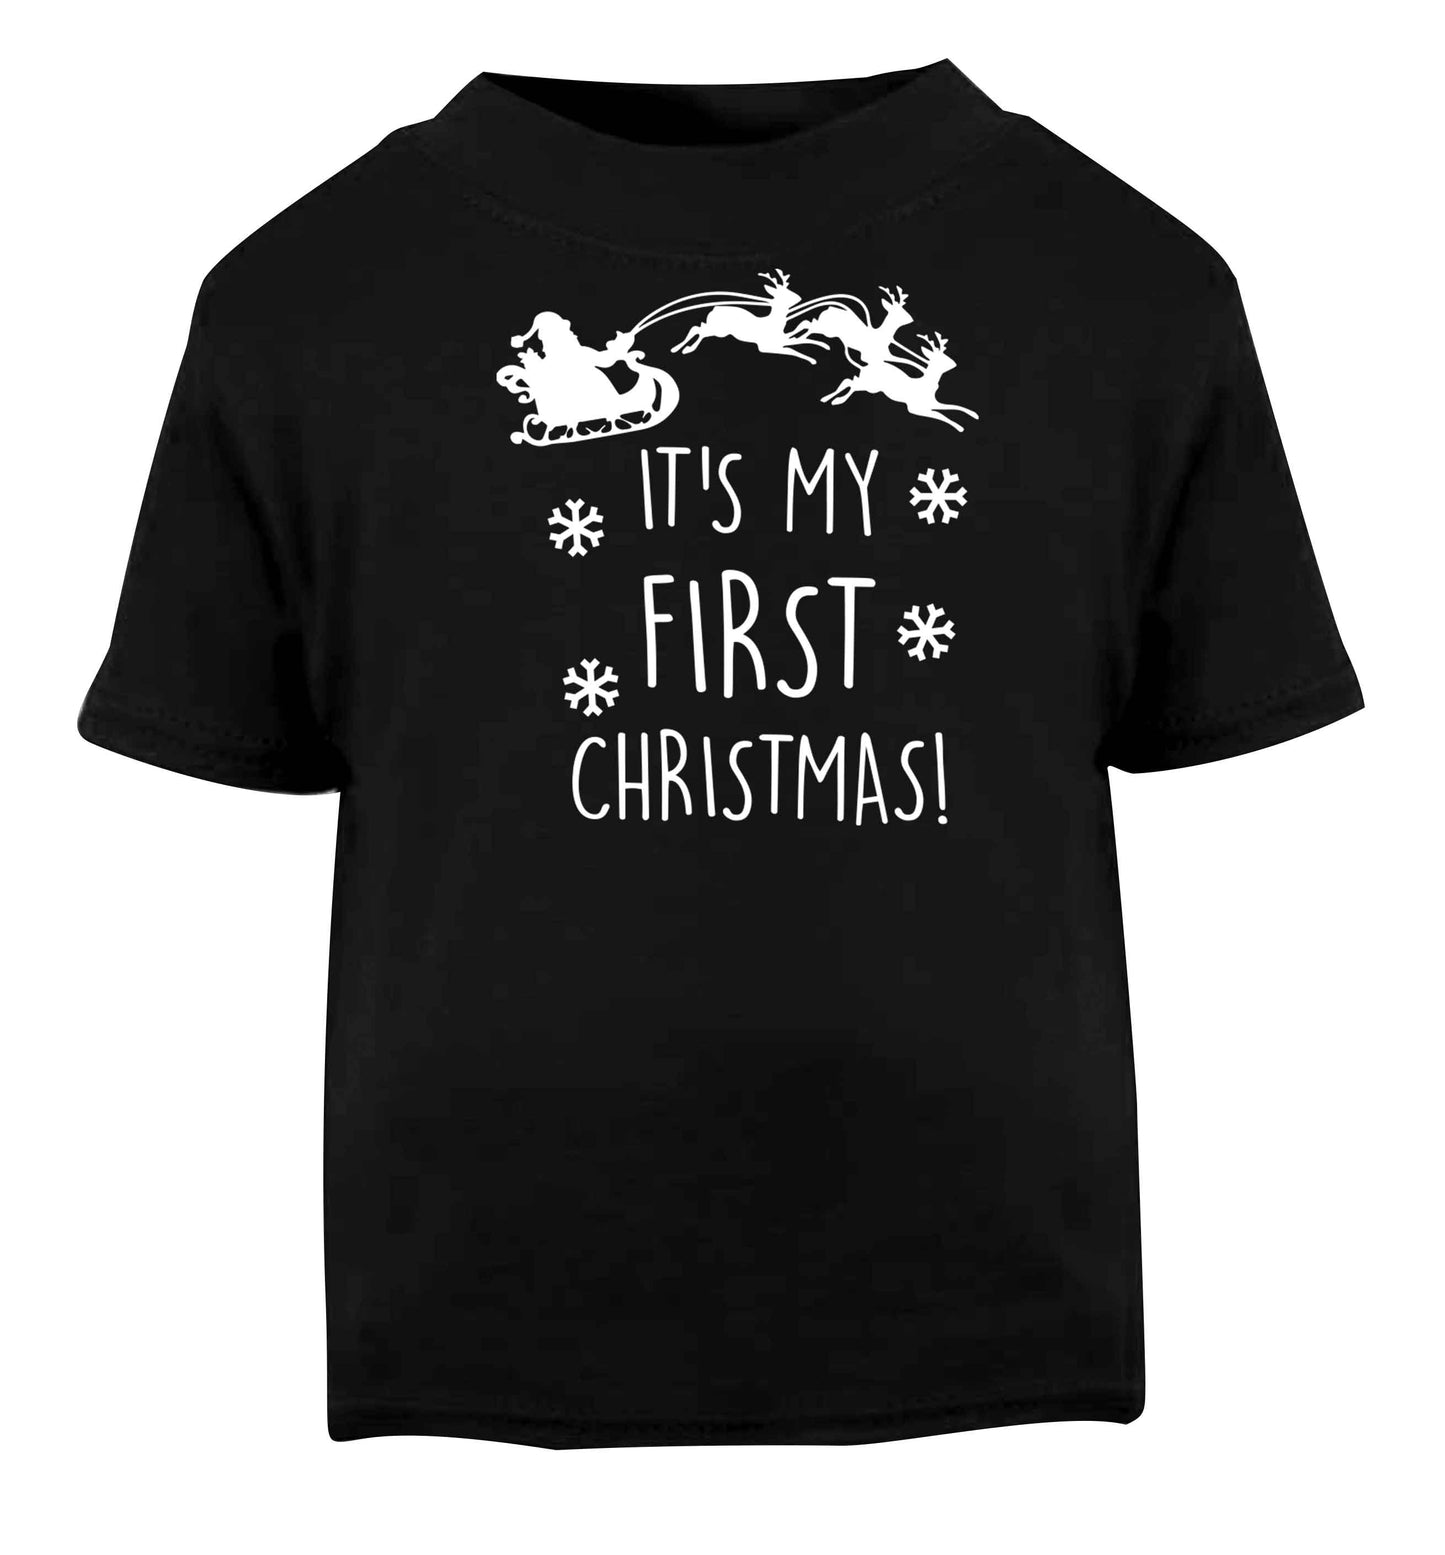 It's my first Christmas - Santa sleigh text Black baby toddler Tshirt 2 years